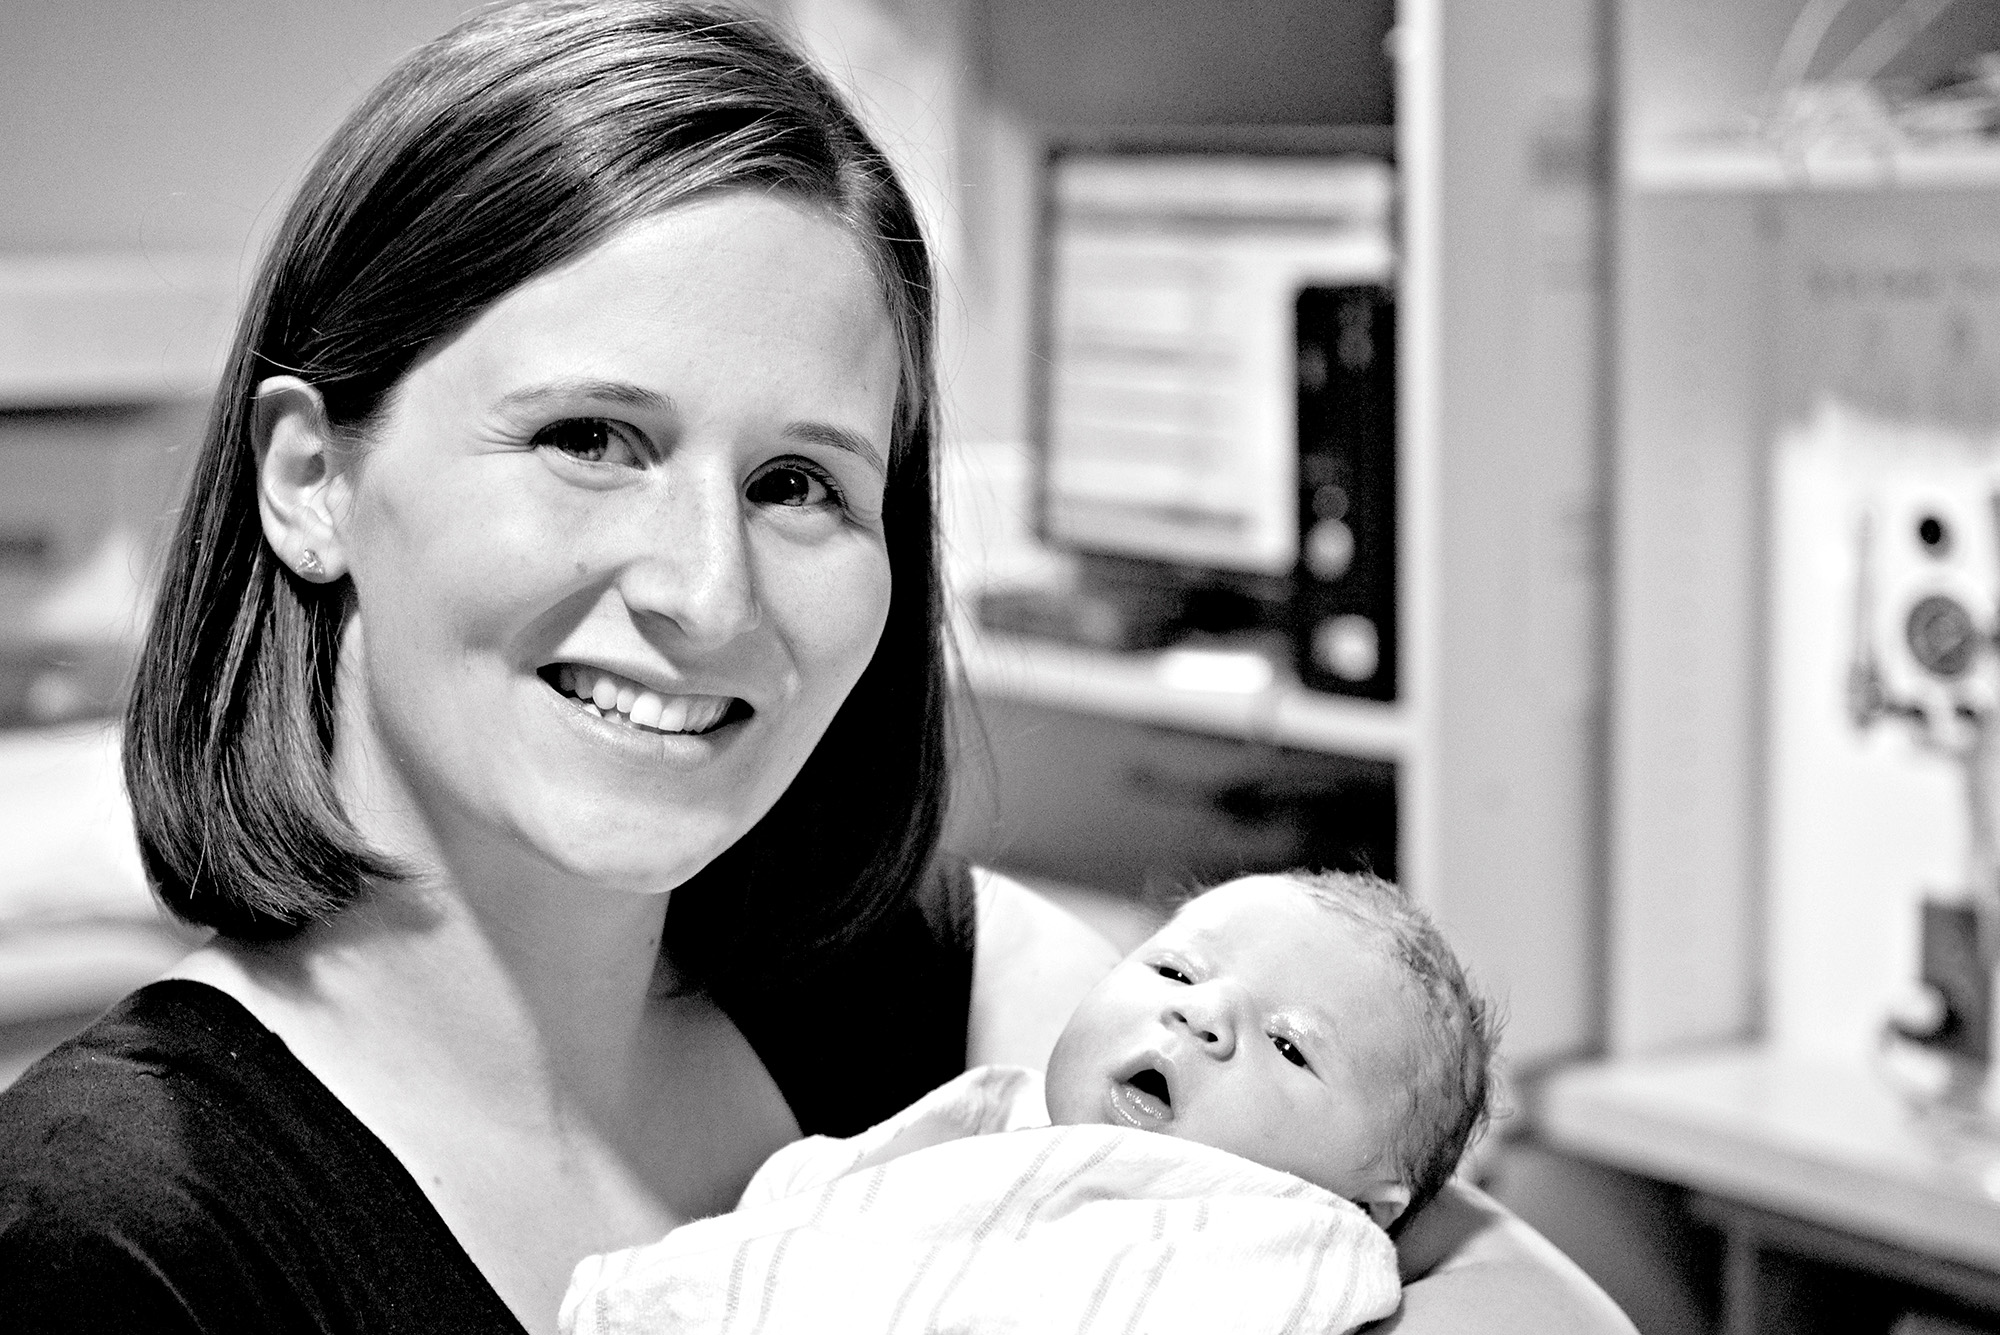 Black and white image of arizona birth photographer Claire Waite holding a newborn after photographing his birth